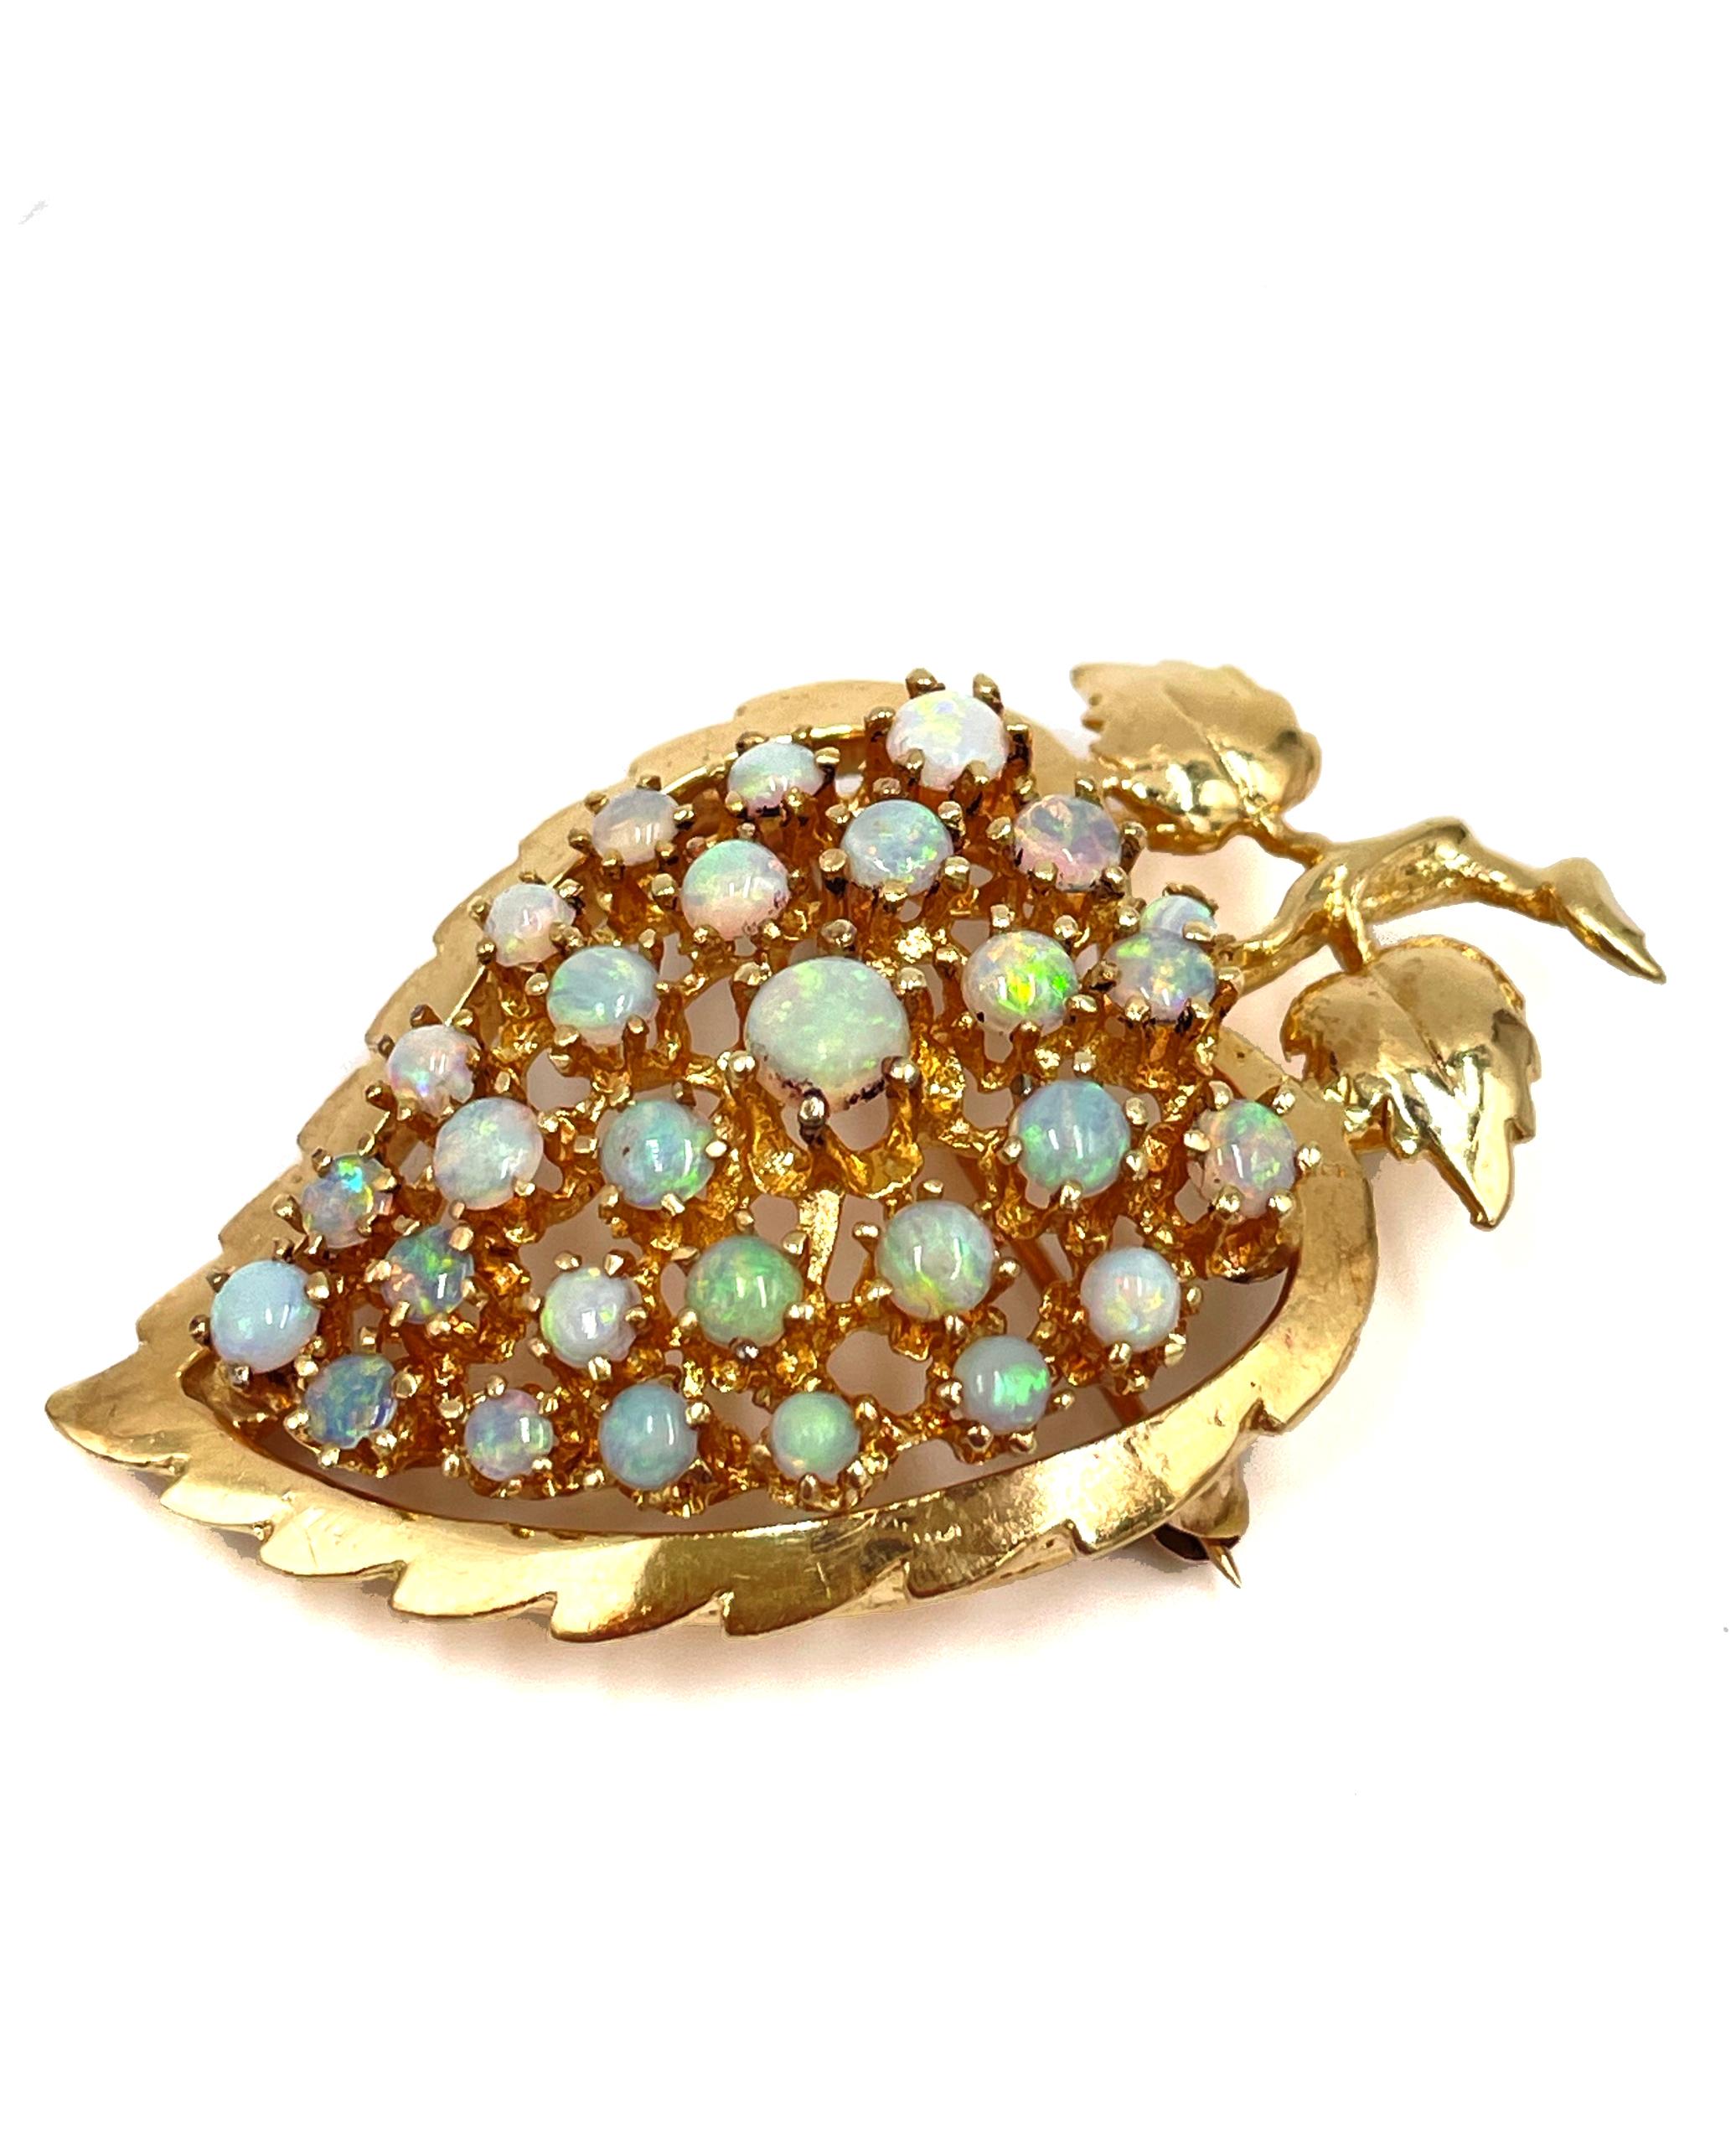 Preowned 14K yellow gold leaf shaped brooch pin/ pendant furnished with 29 opals. The opals are blue/green iridescent color. The sizes range from 2.4mm to 4.2mm. The brooch is in very good working condition with light scratches all around. 

Two